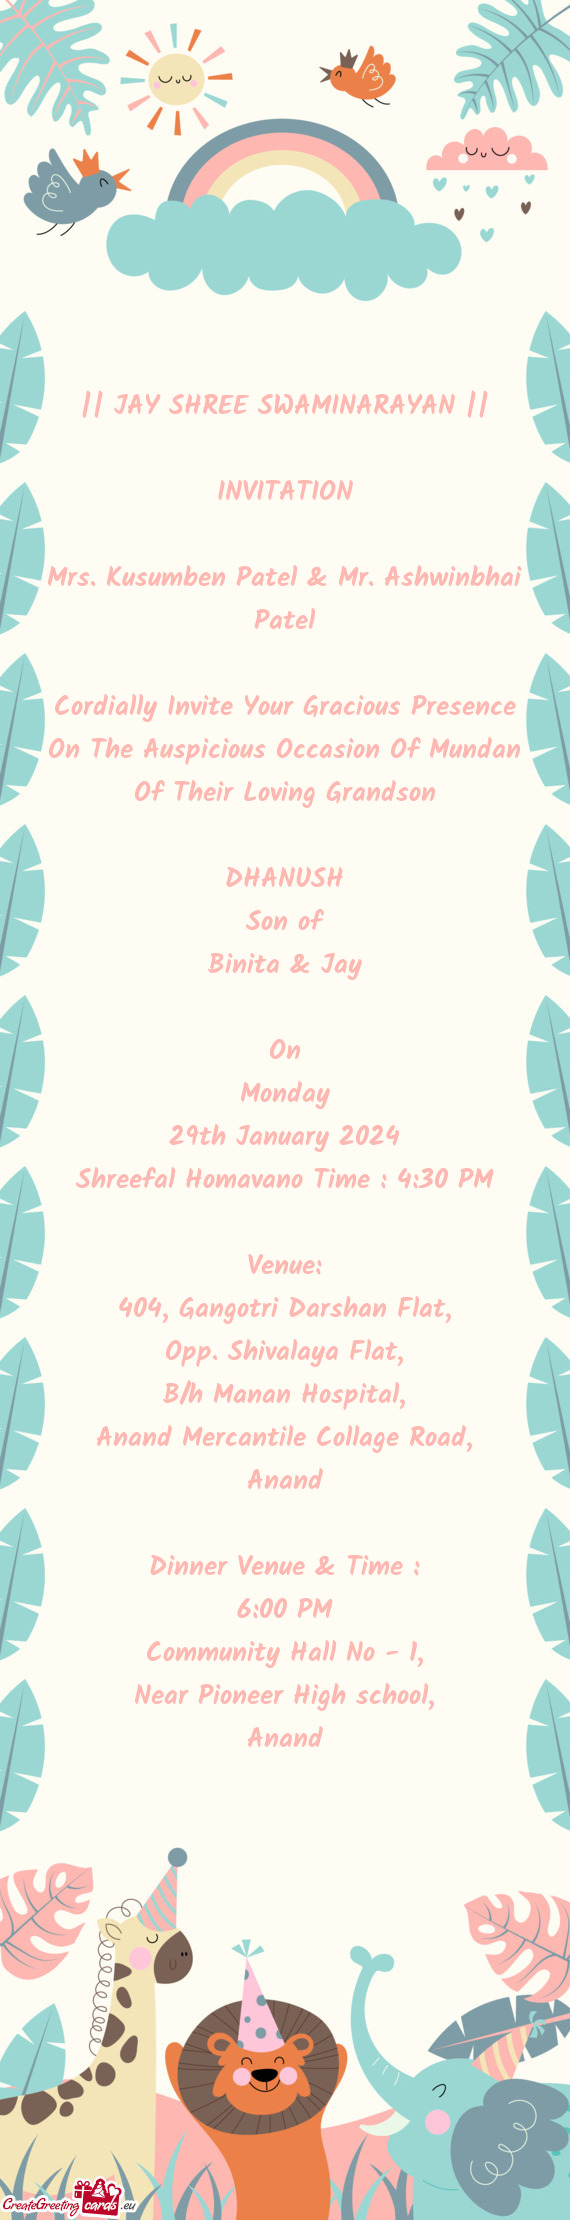 Cordially Invite Your Gracious Presence On The Auspicious Occasion Of Mundan Of Their Loving Grandso